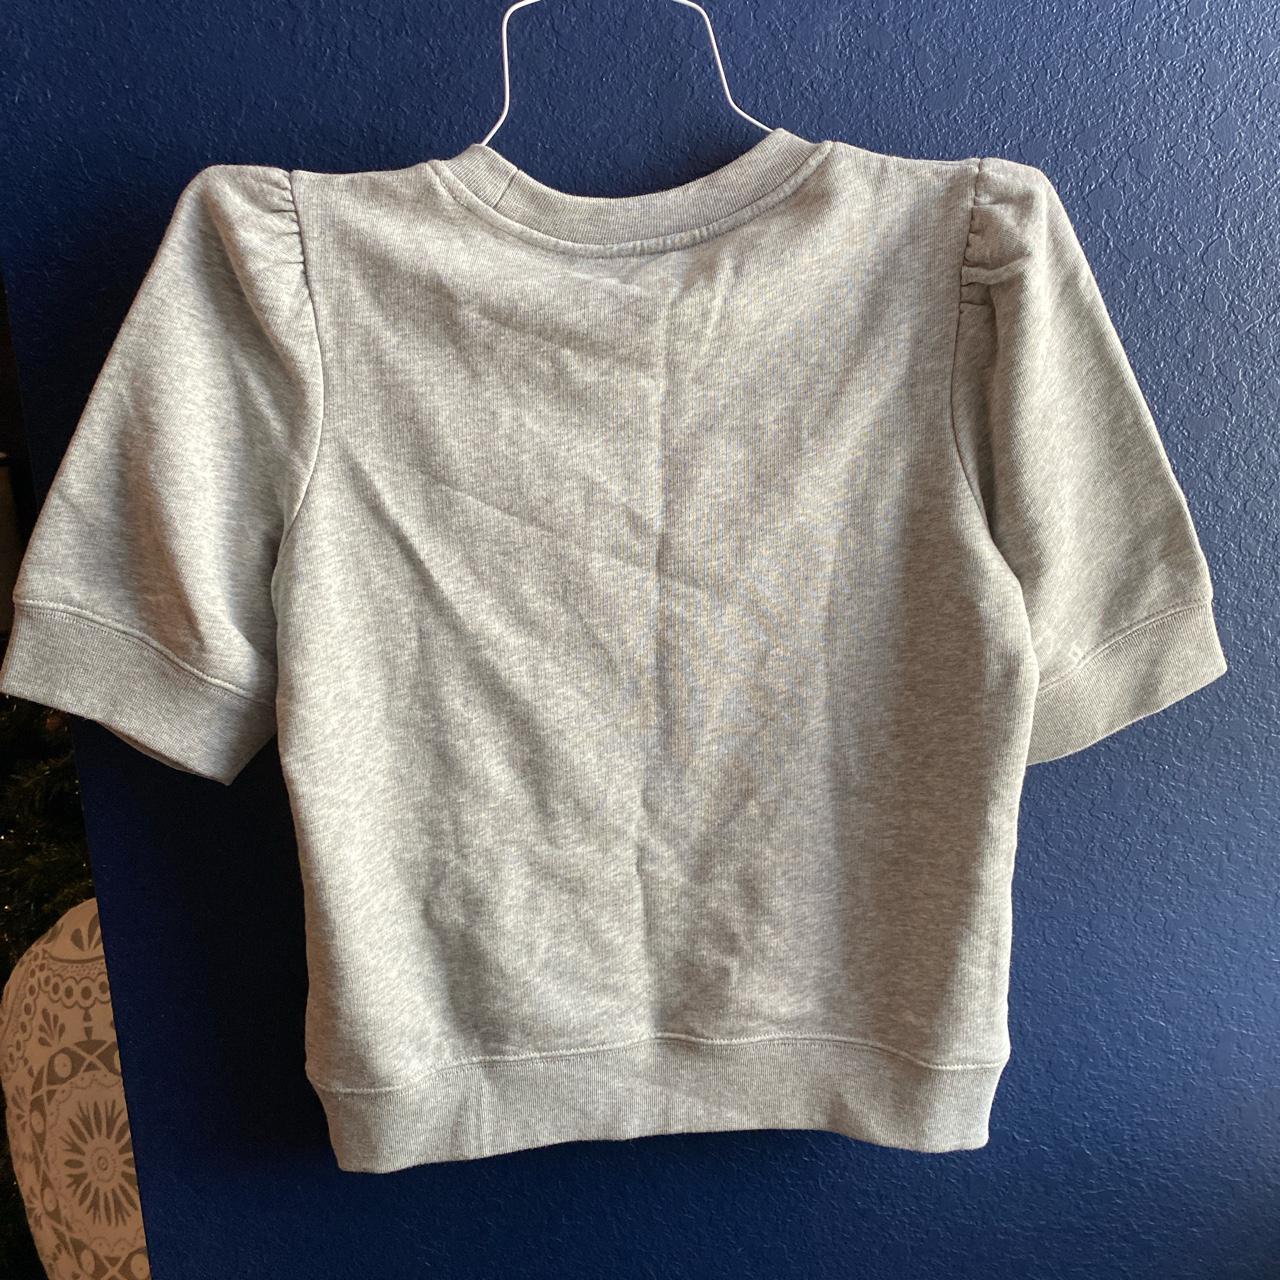 Kate Spade New York Women's Grey and Red Jumper | Depop